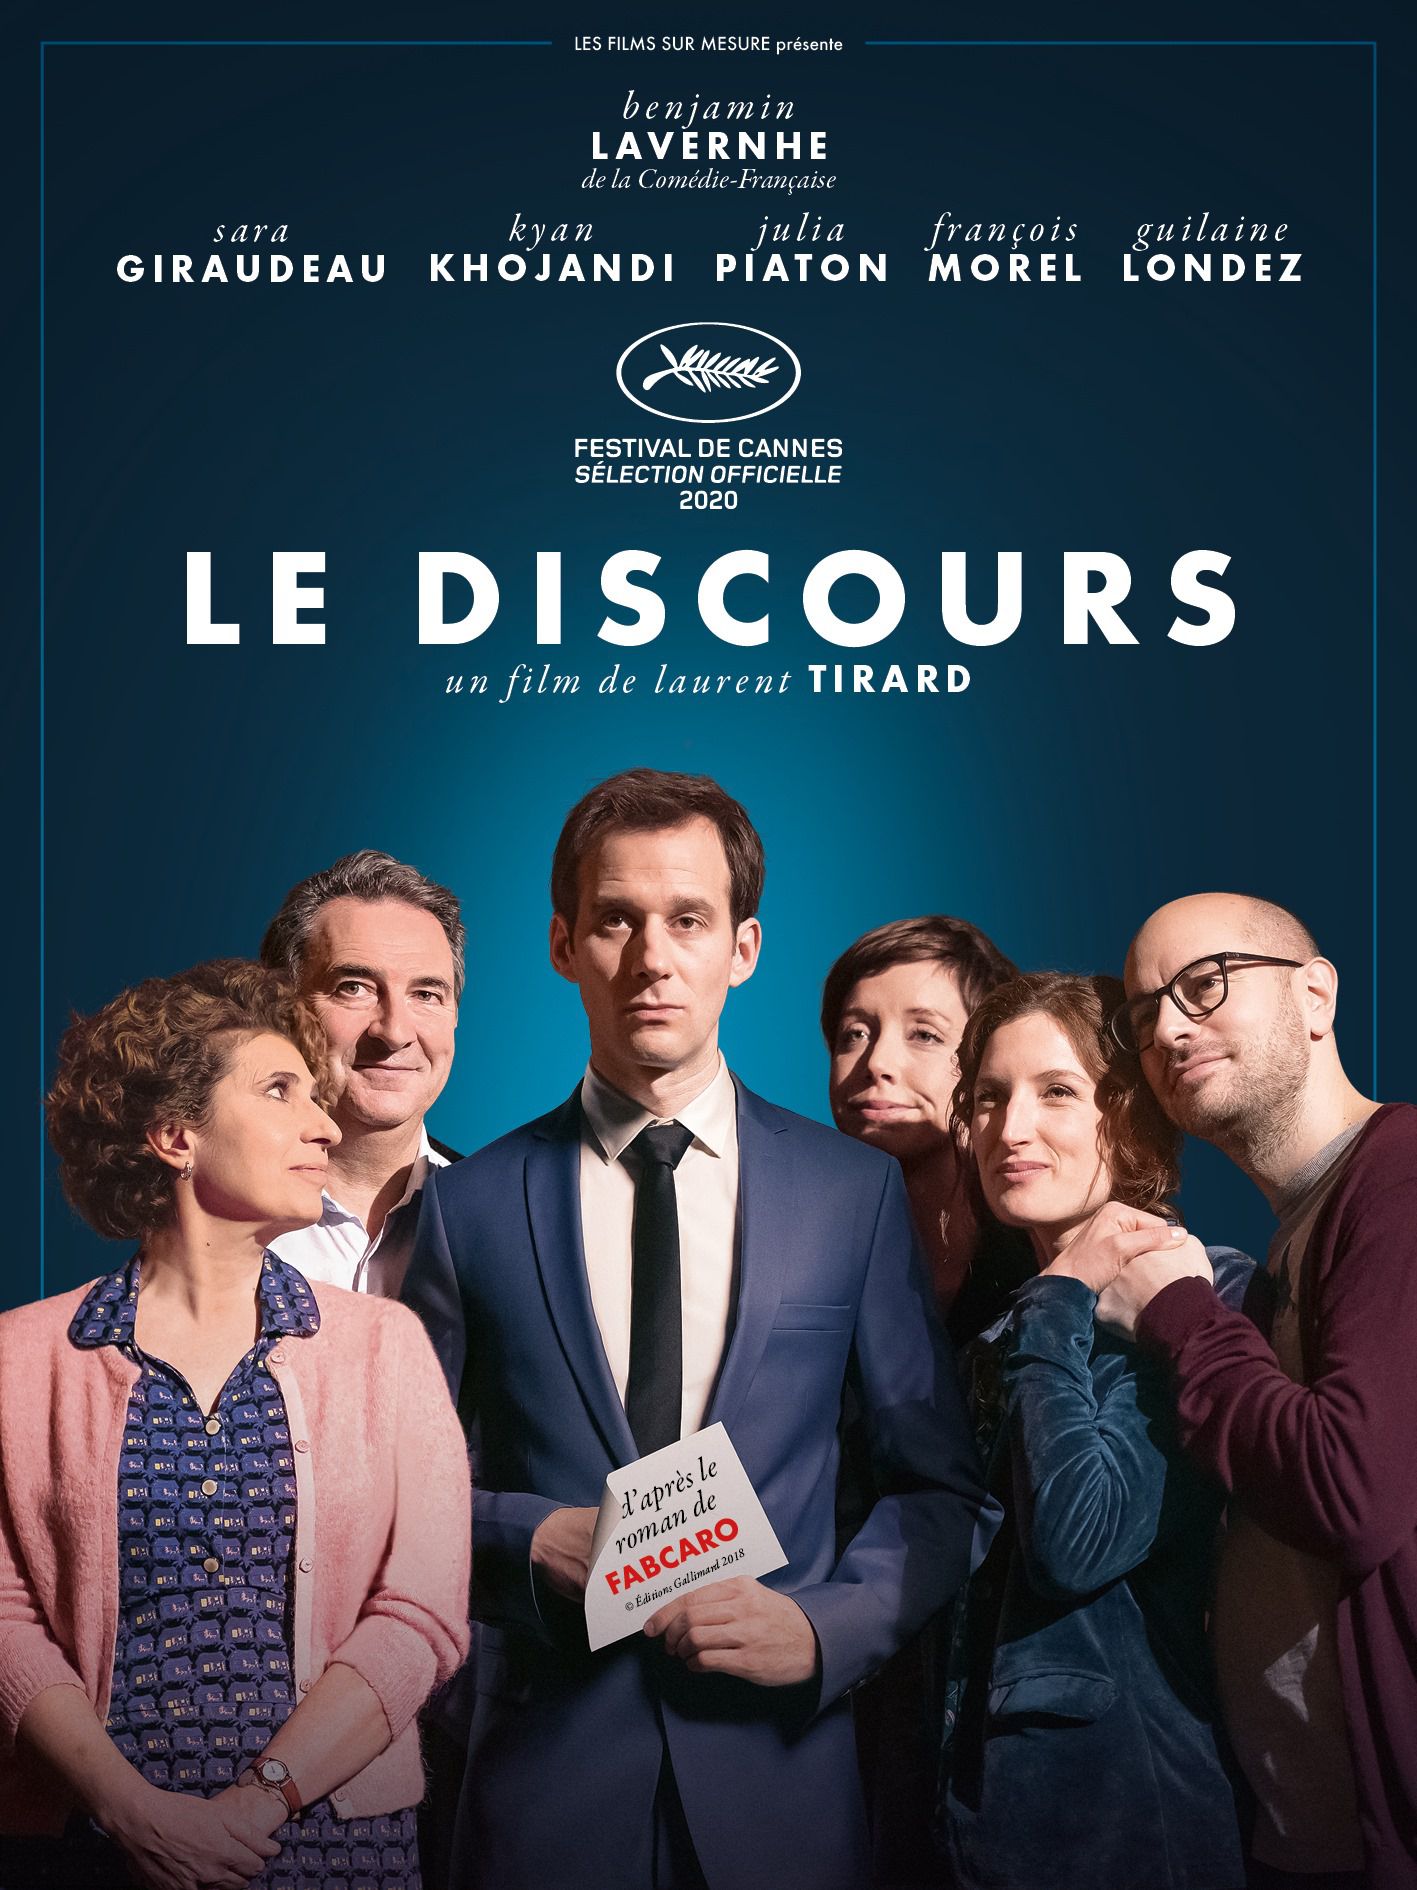 Le Discours - Film (2020) streaming VF gratuit complet